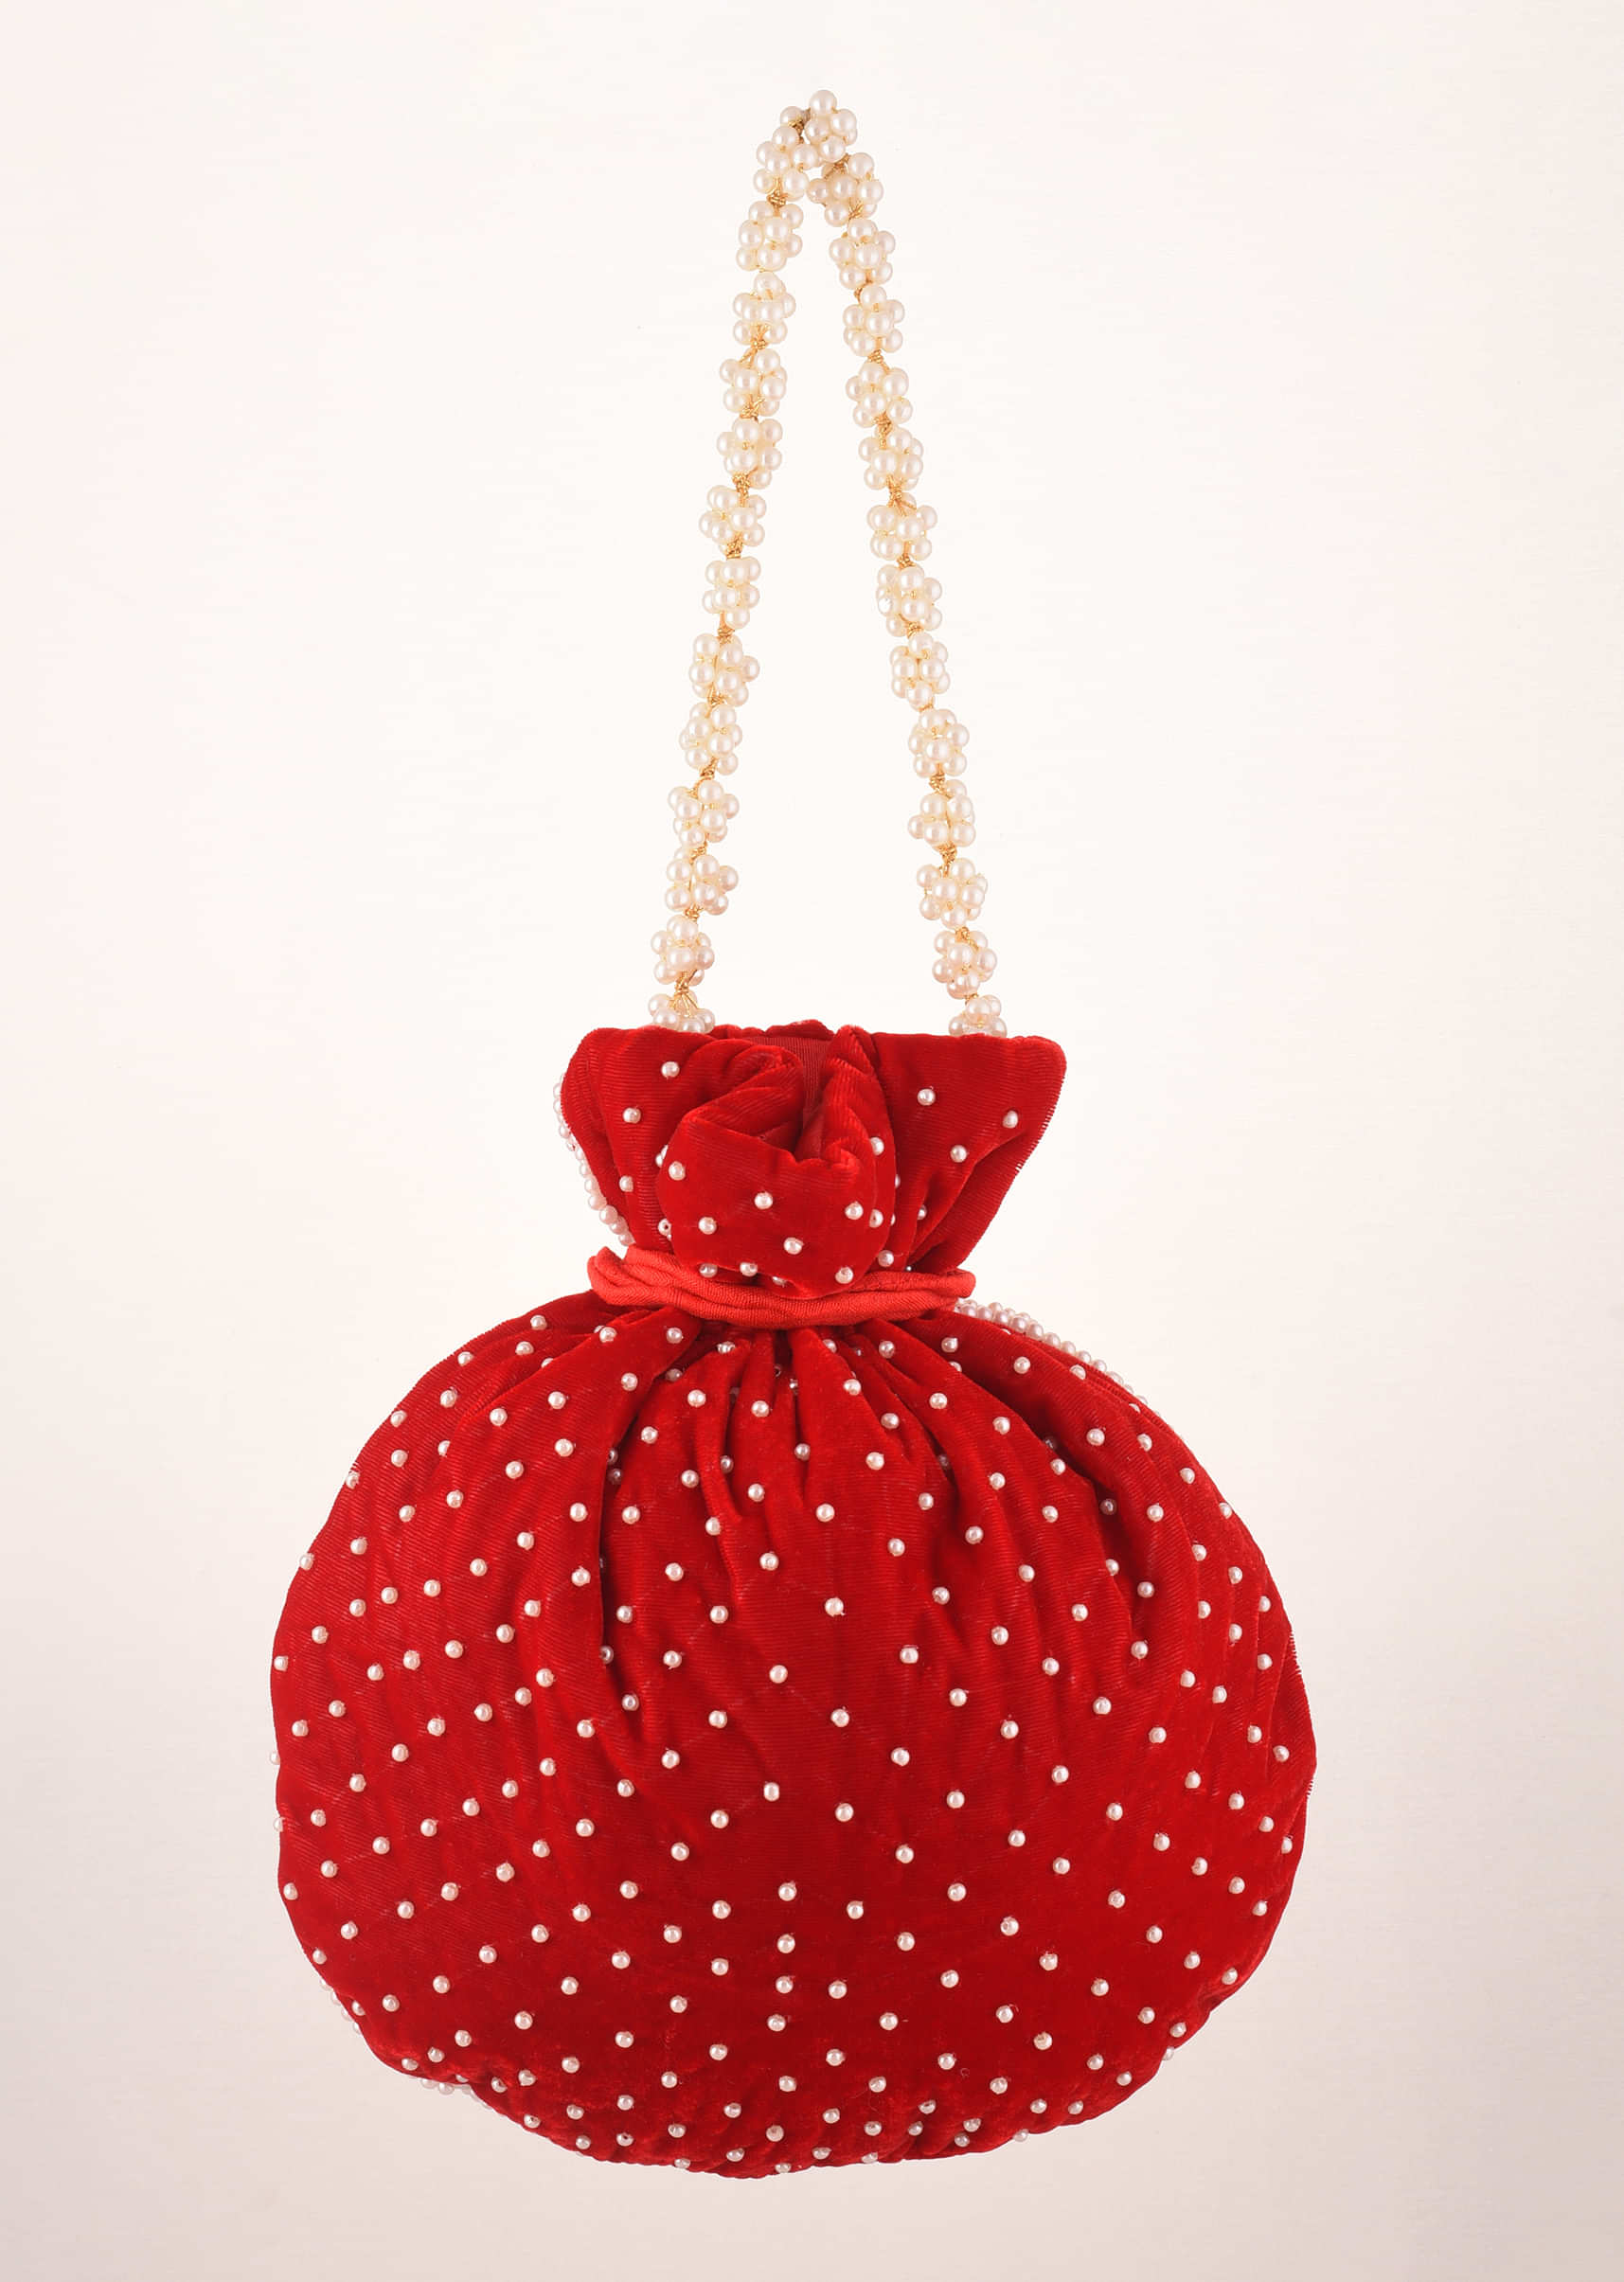 Cherry Red Potli Bag In Velvet With Moti Work In Crescent Design Along The Edge And Scattered In The Centre By Shubham